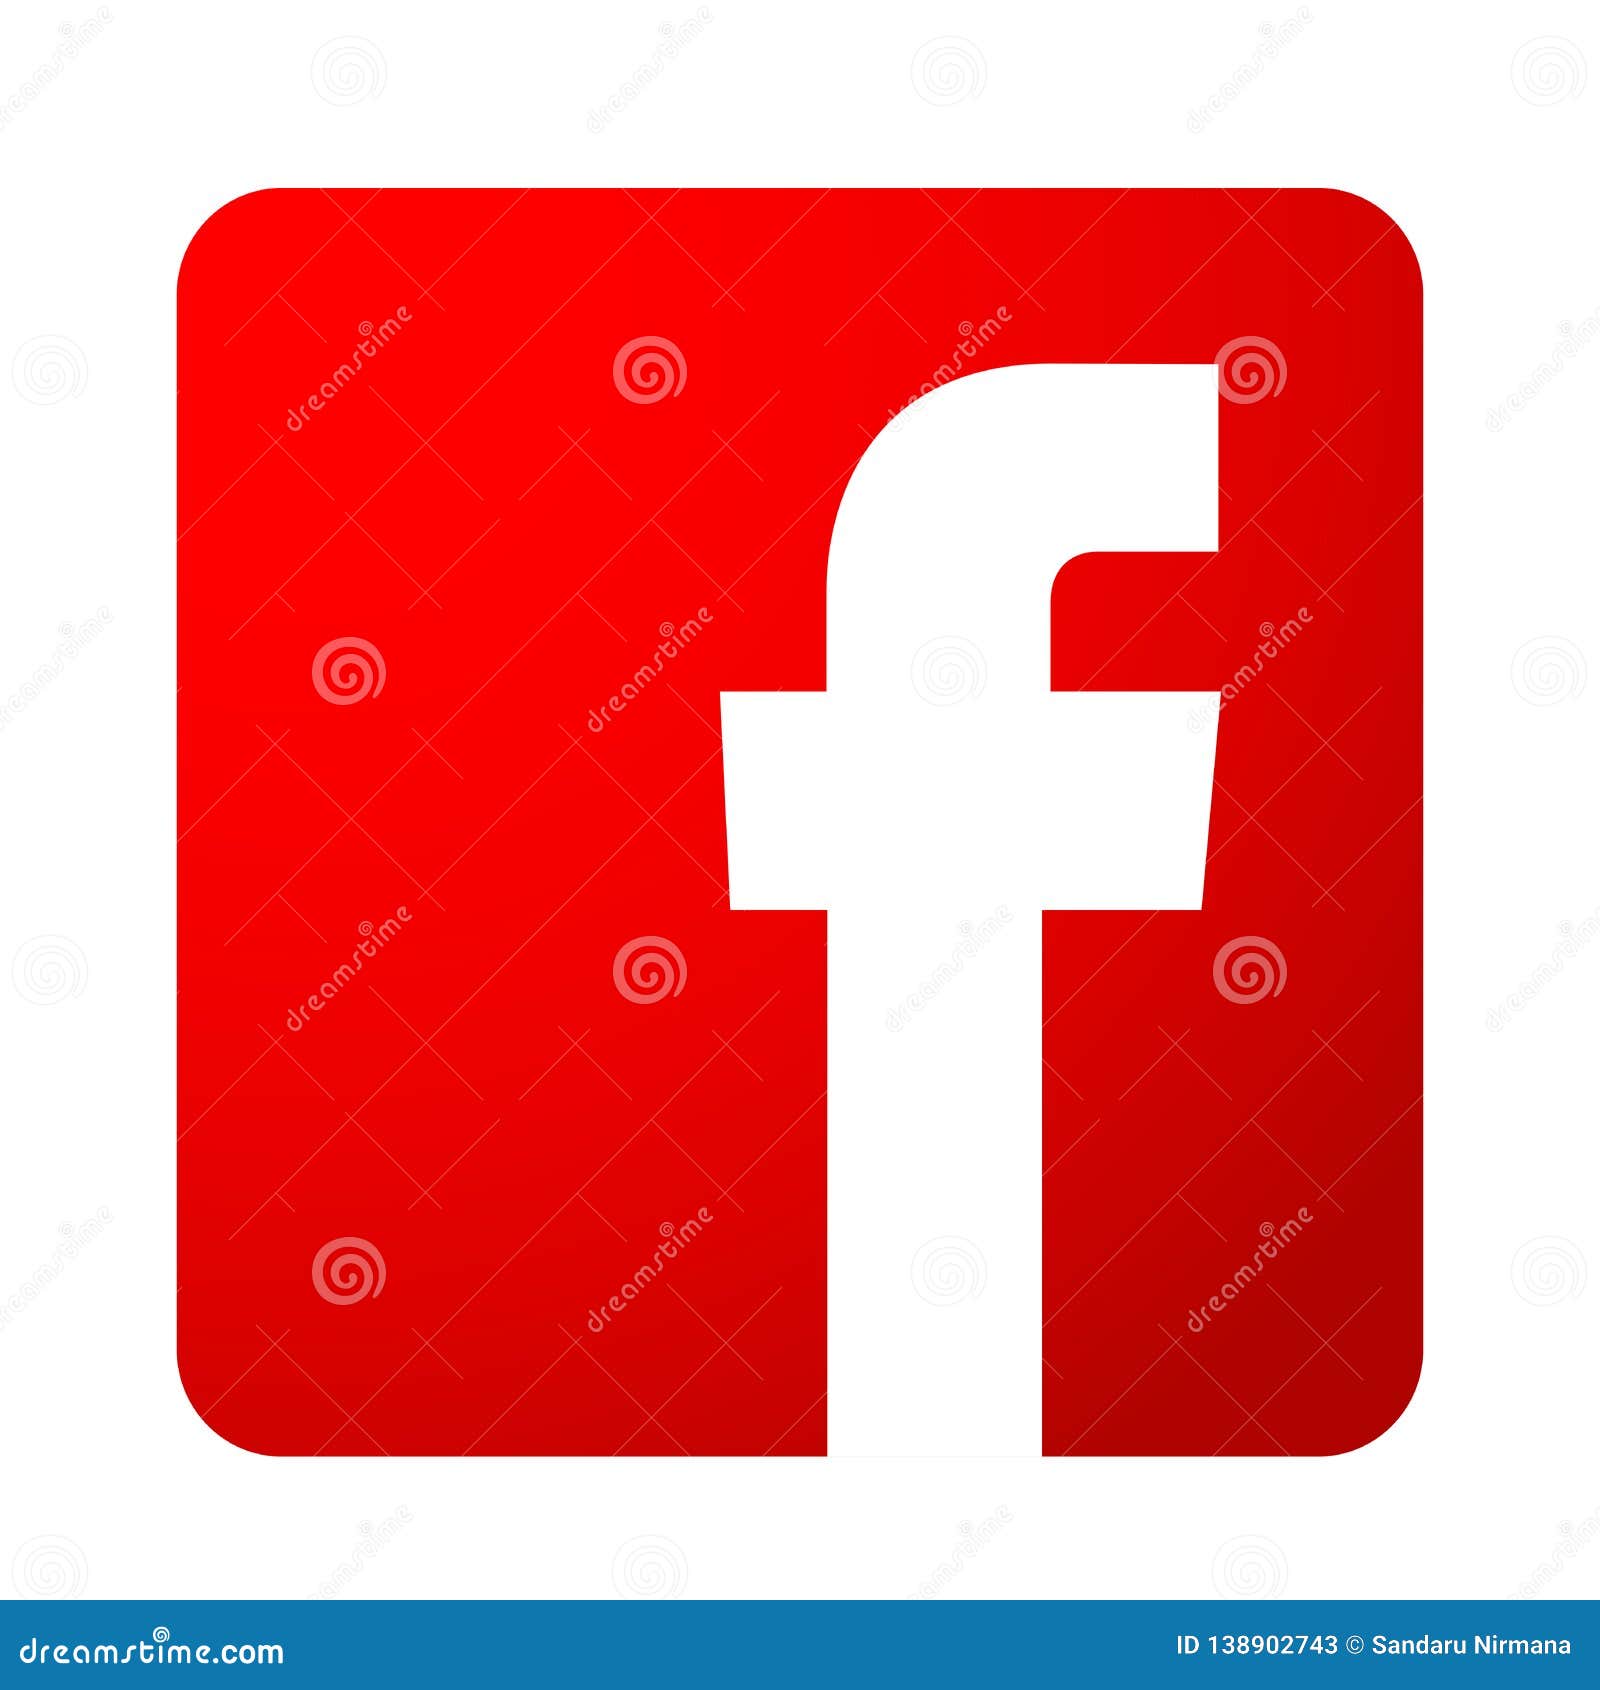 Facebook Logo Icon Vector In Red Illustrations On White Background Editorial Stock Photo Illustration Of Follow Connection